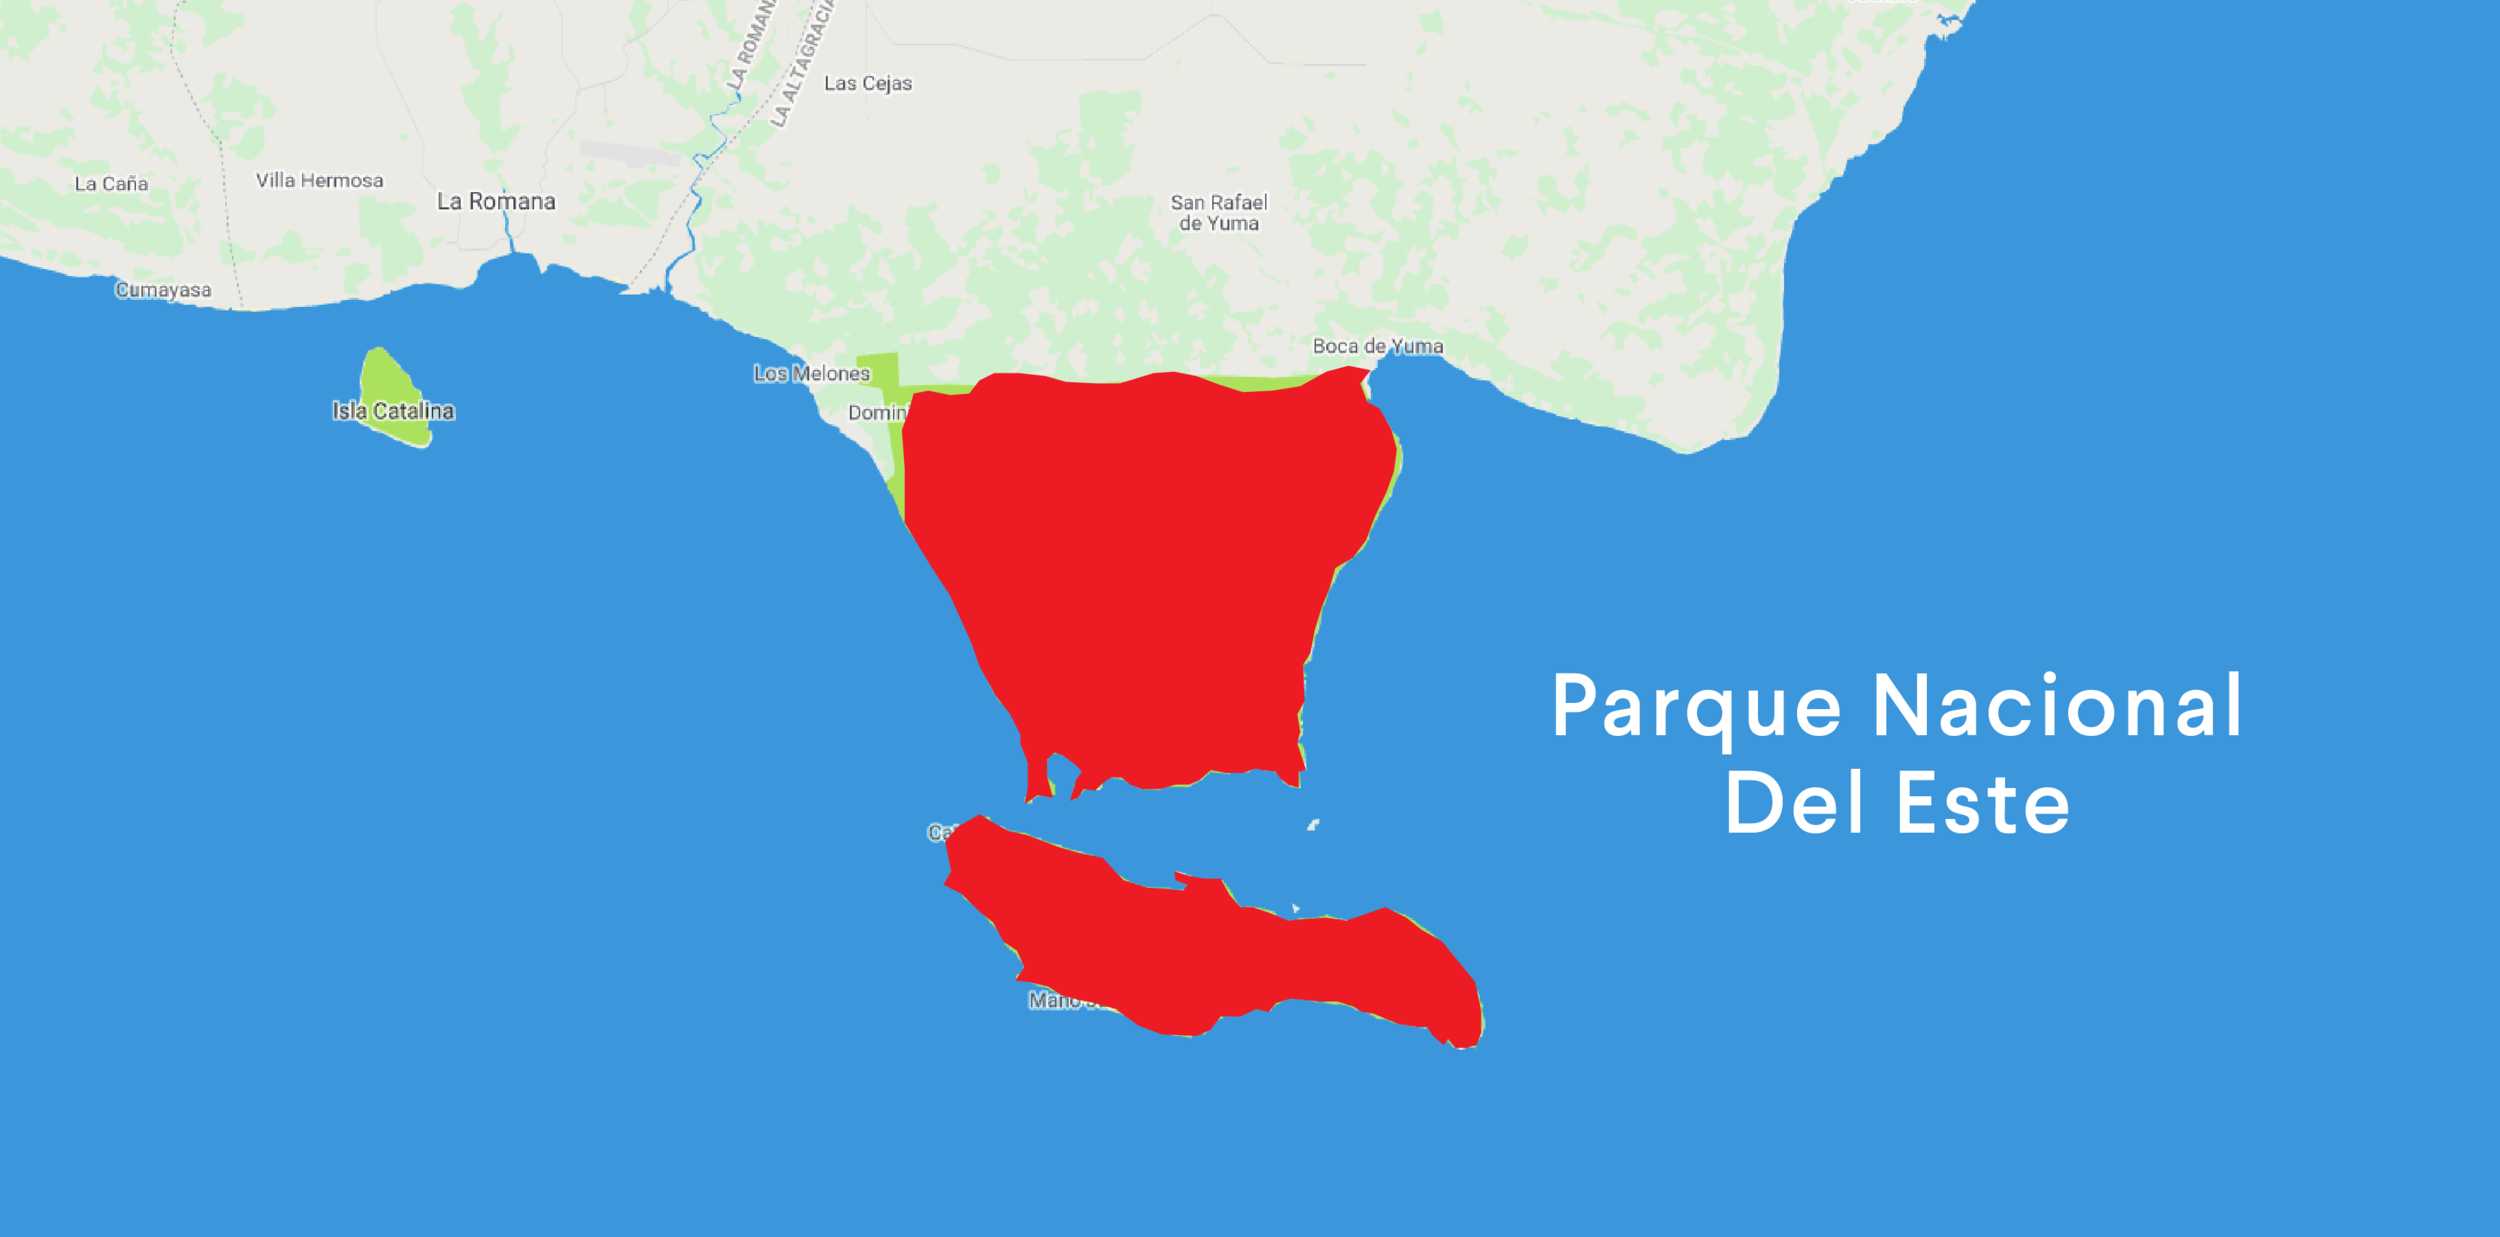  Text reads, “Parque Nacional Del Este” next to highlighted region on map.  